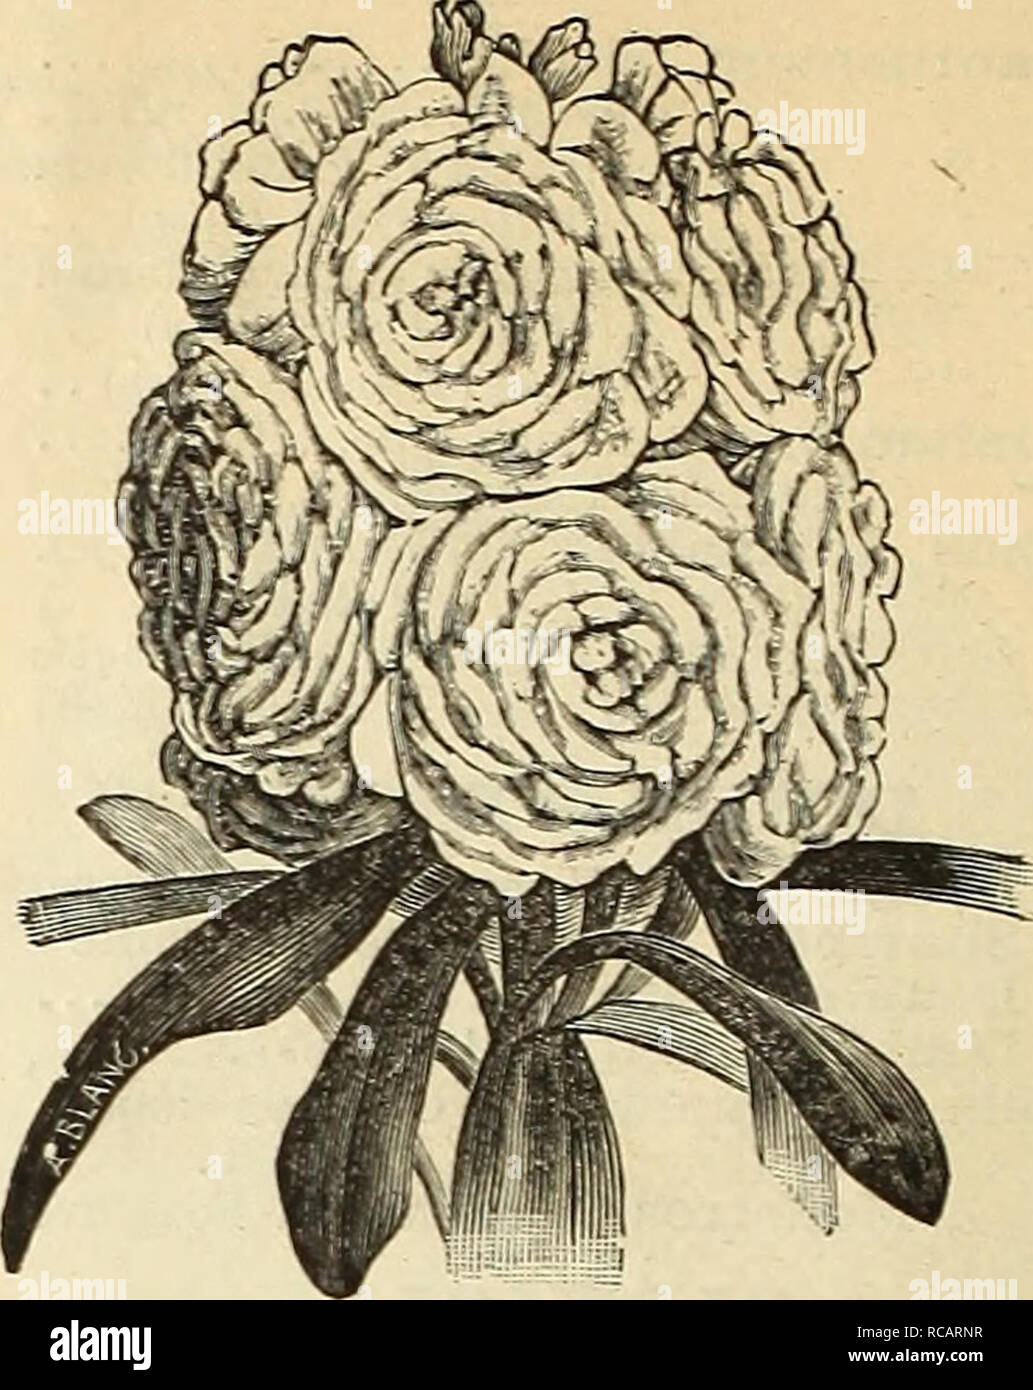 . Dreer's autumn bulb catalogue : 1891. Bulbs (Plants) Catalogs; Flowers Seeds Catalogs; Gardening Equipment and supplies Catalogs; Nurseries (Horticulture) Catalogs. Primula Sinensis Pimbriata. Dreer's Prize Strain. Choicest Mixed. A strictly first-class strain, selected from fringed flowers only, and comprising bright shades and large size. We have no hesitation in offering this as the very best strain procurable 25 Primula Fimbriata Alba, pure white 25 â¢ â Rubra, red 25 &quot; â¢â Alba Magnifica, pure white. with a large bright yellow eye, 50 'â¢ Kermesina Splendens, bril- liant crimson wi Stock Photo